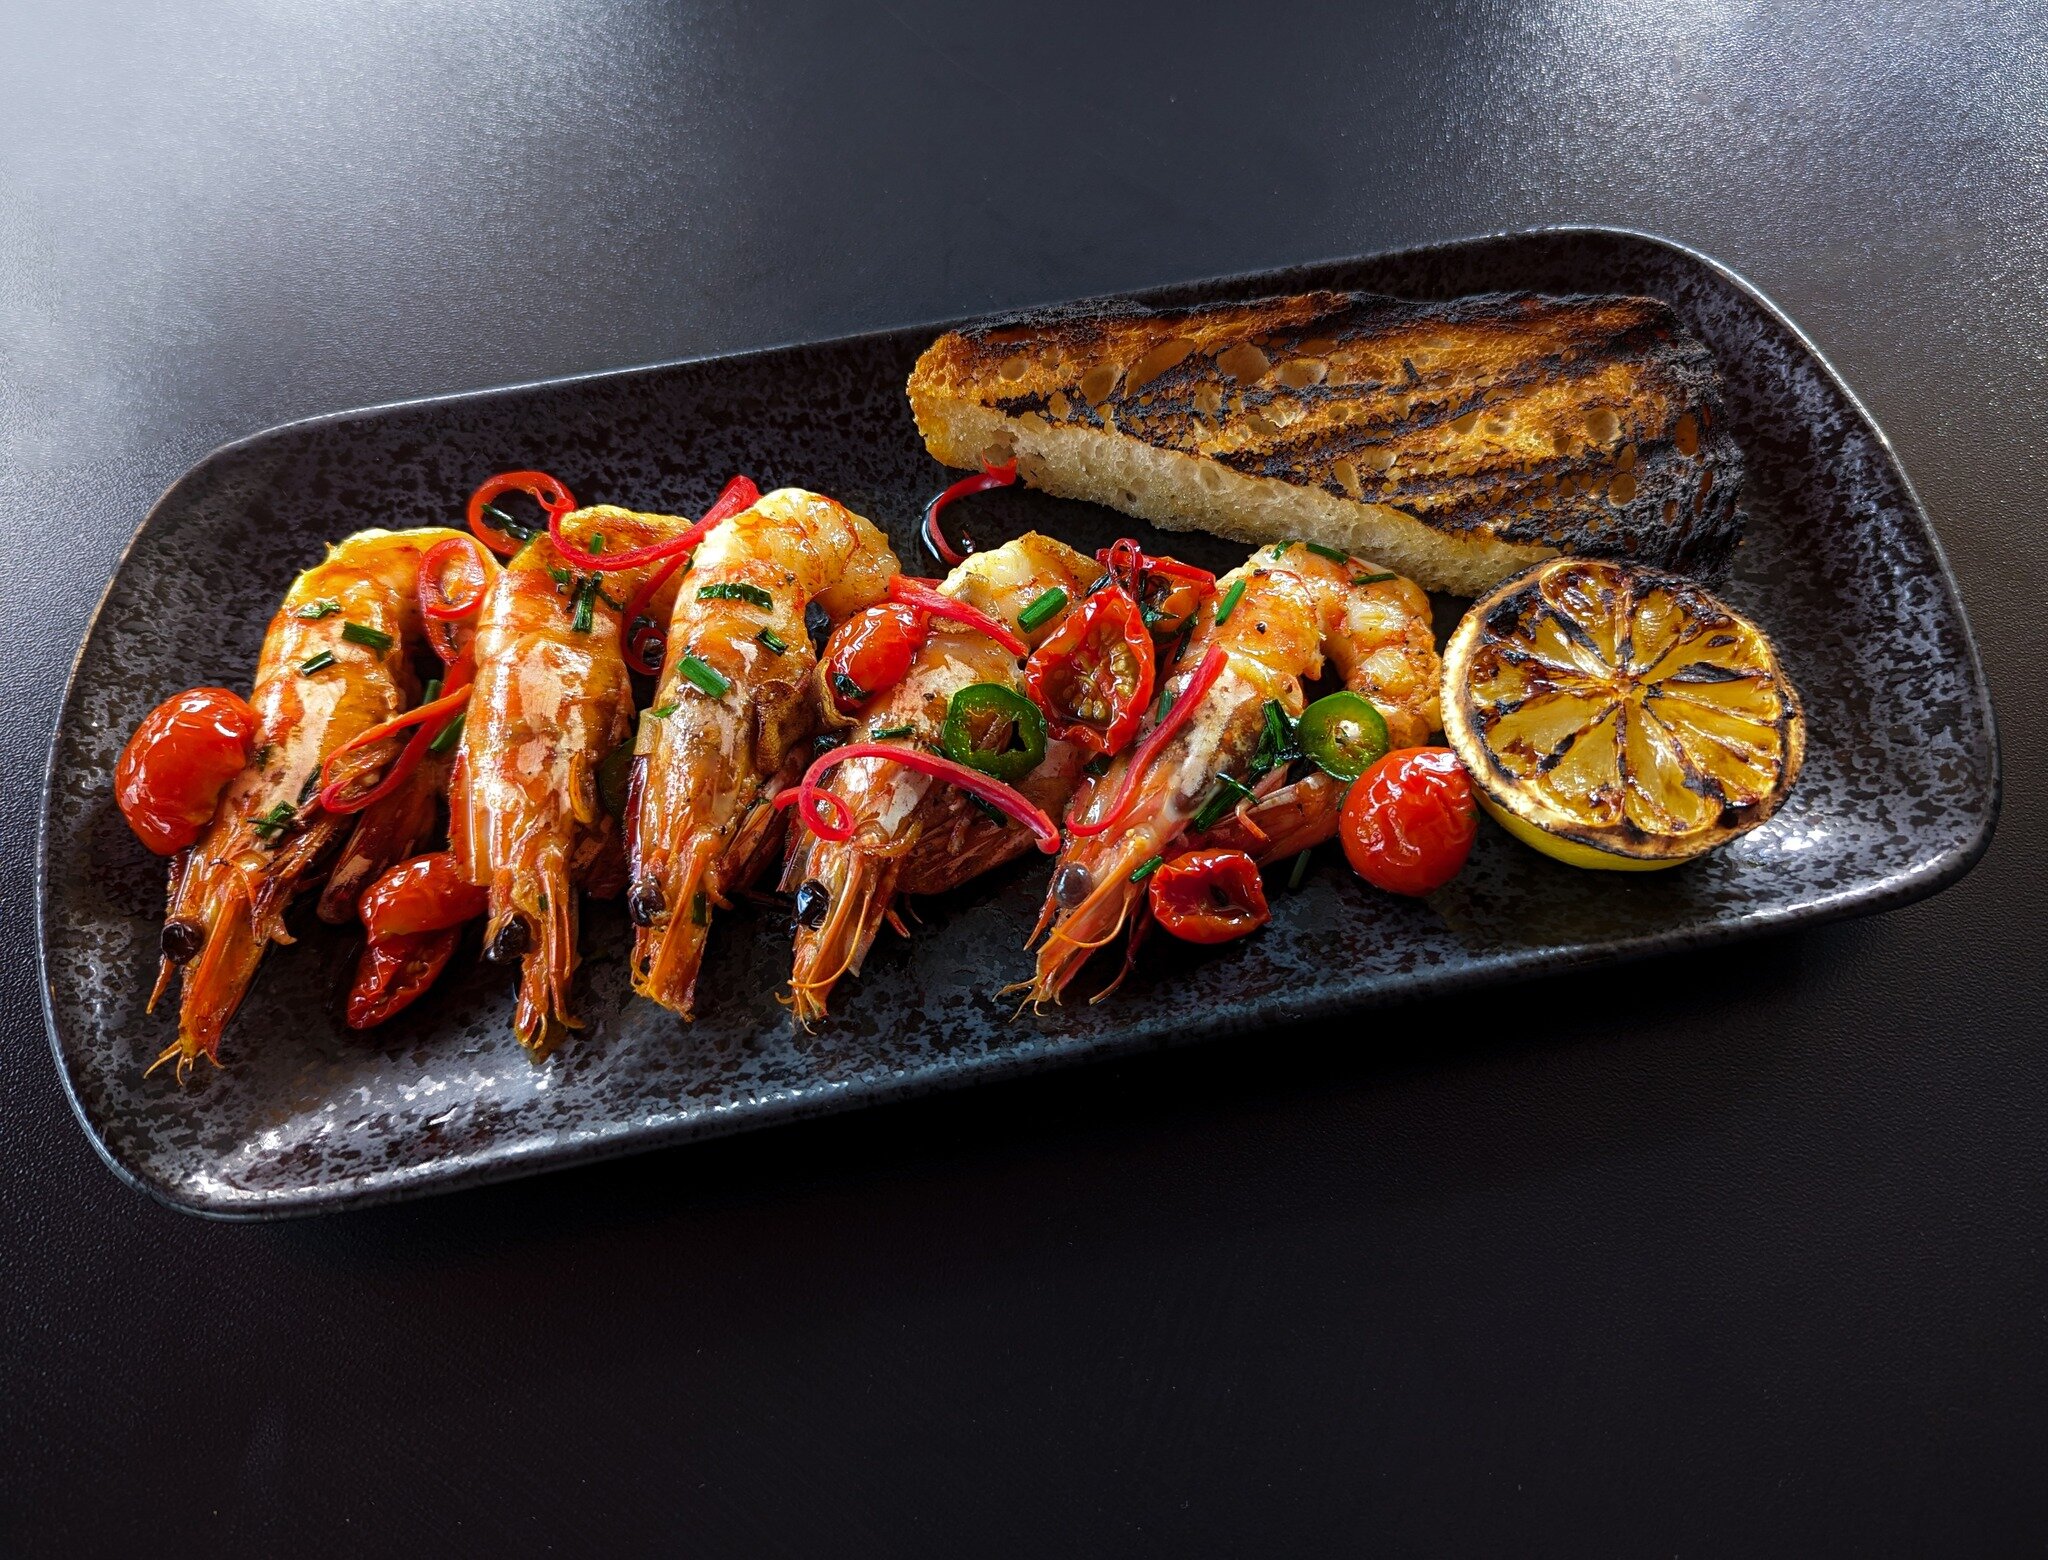 Sustainable Seafood week continues until Sunday 24th March!
.
Head to Mures Upper Deck to try some incredible specials that are shining a light on MSC/ASC certified seafood, like these delicious @mscbluefishtick Australian Tiger Prawns.
.
The Marine 